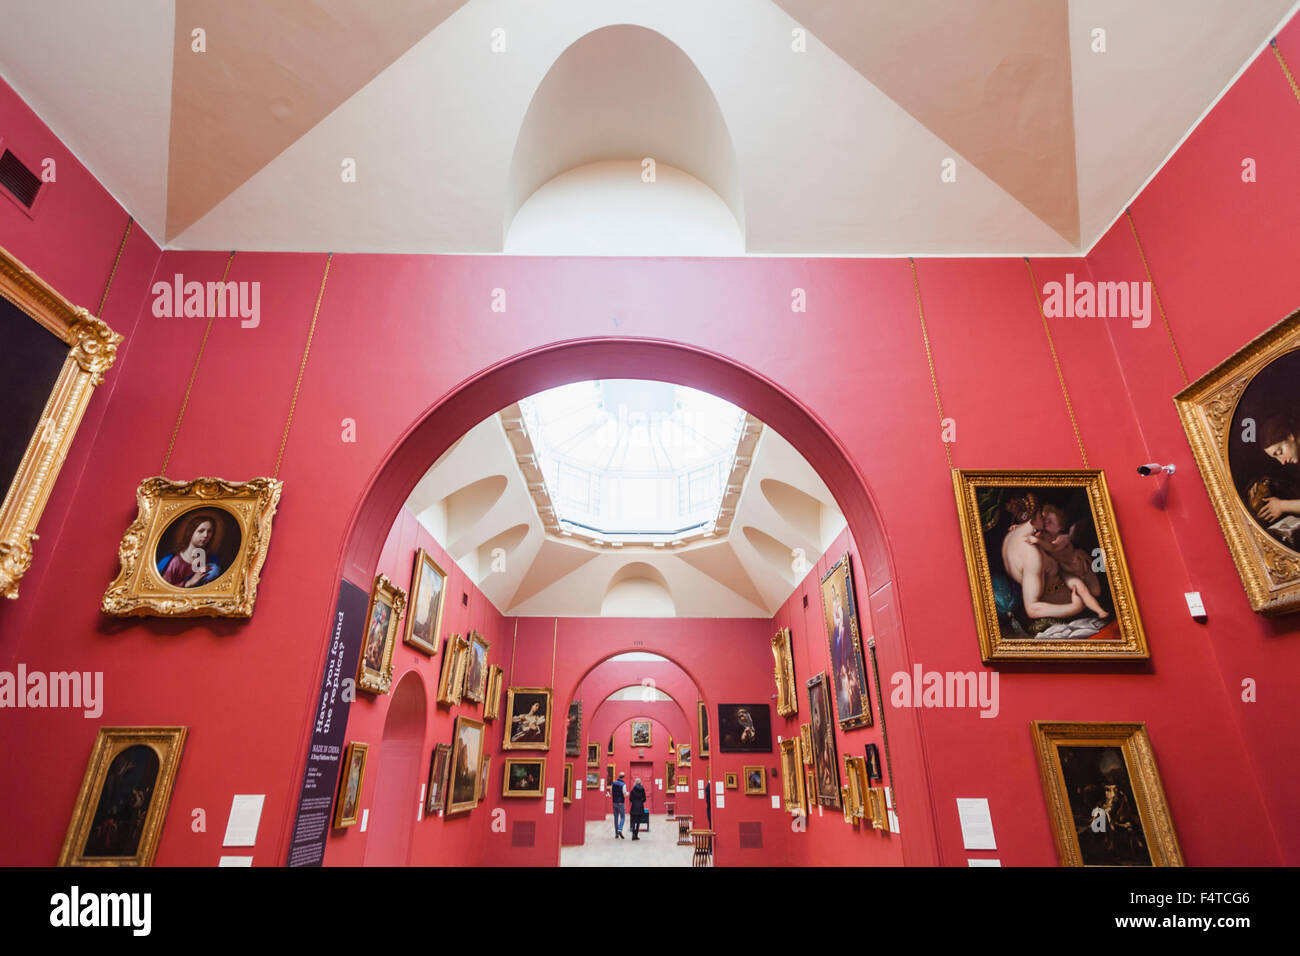 England, London, Dulwich, Dulwich Picture Gallery, Interior View Stock Photo